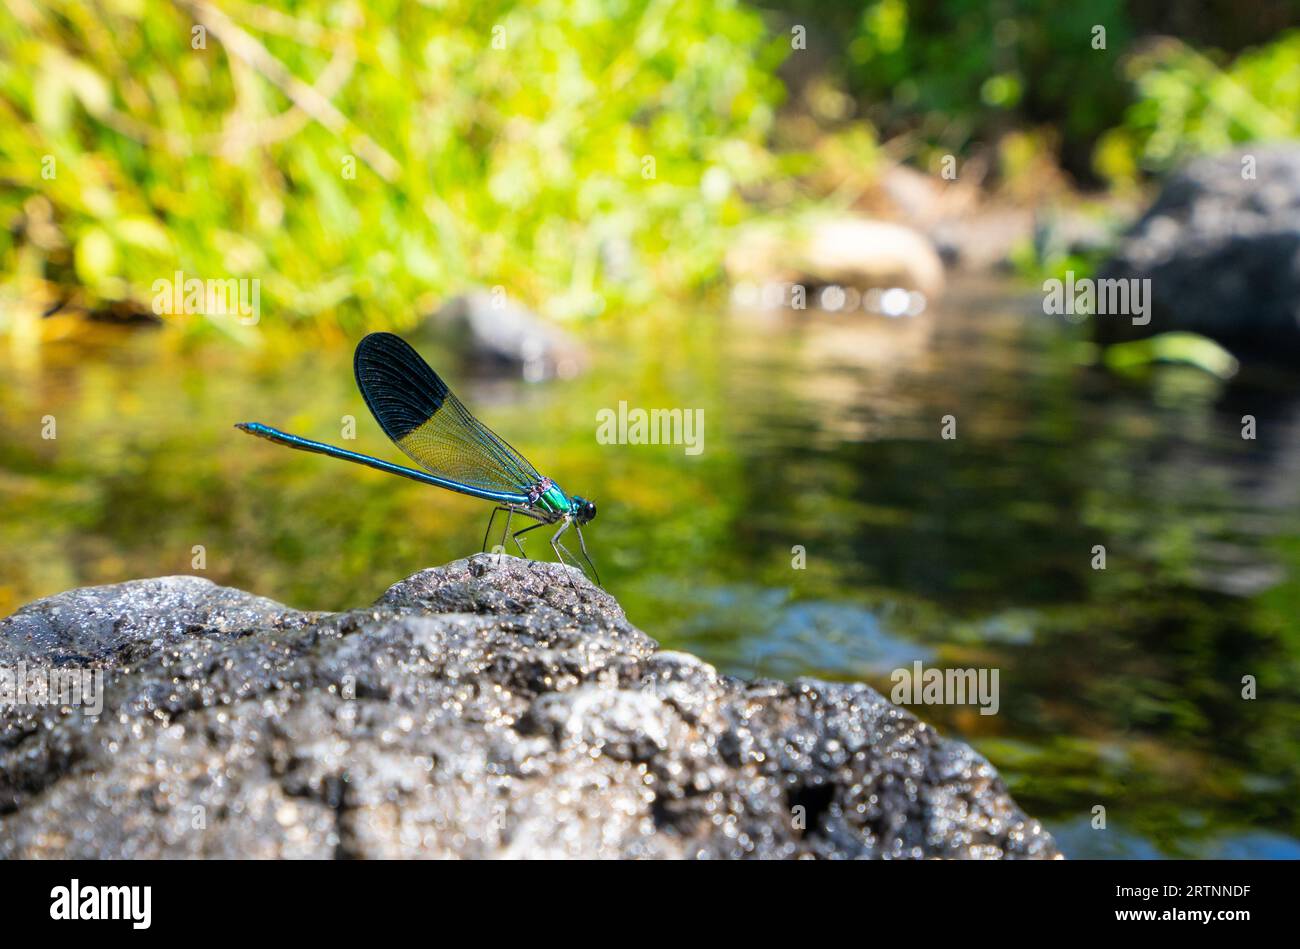 Calopteryx syriaca is a species of damselfly in the family Calopterygidae known commonly as the Syrian demoiselle. It is native to the southern Levant Stock Photo